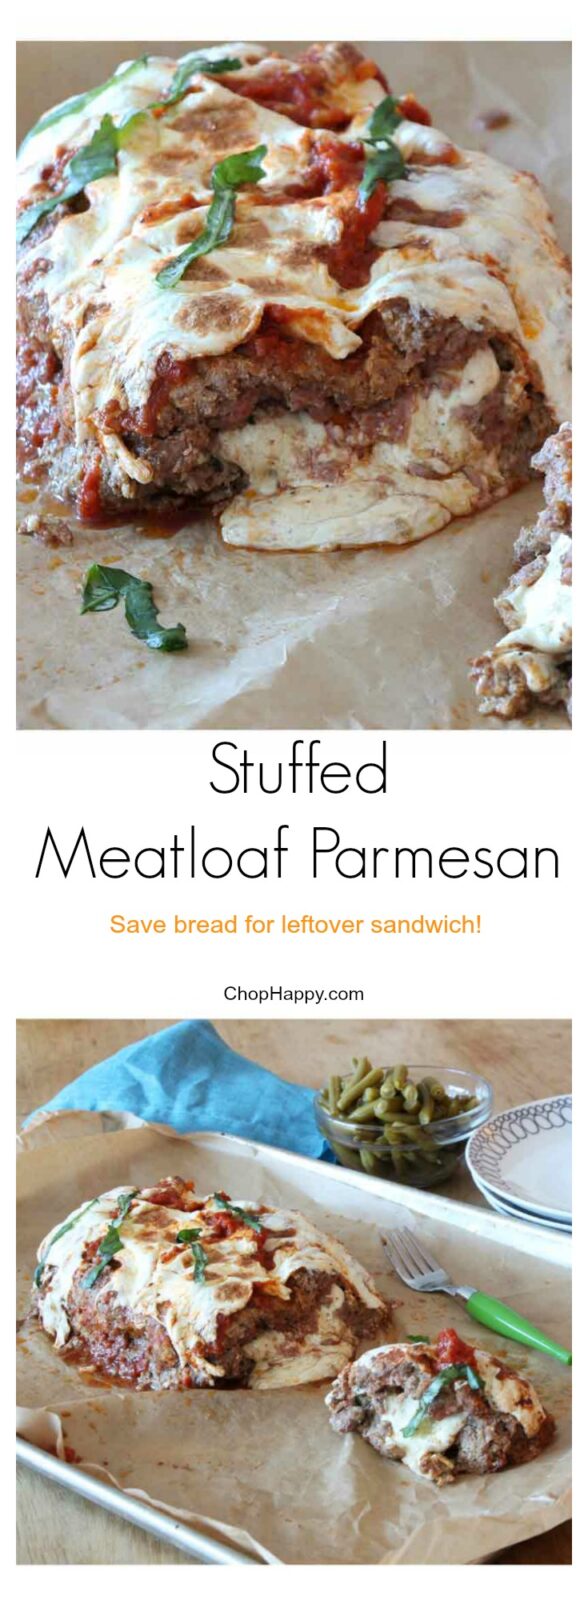 Easy yummy cheese kissed meatloaf. The best part is the leftovers! Make them into amazing sandwiches. ChopHappy.com 